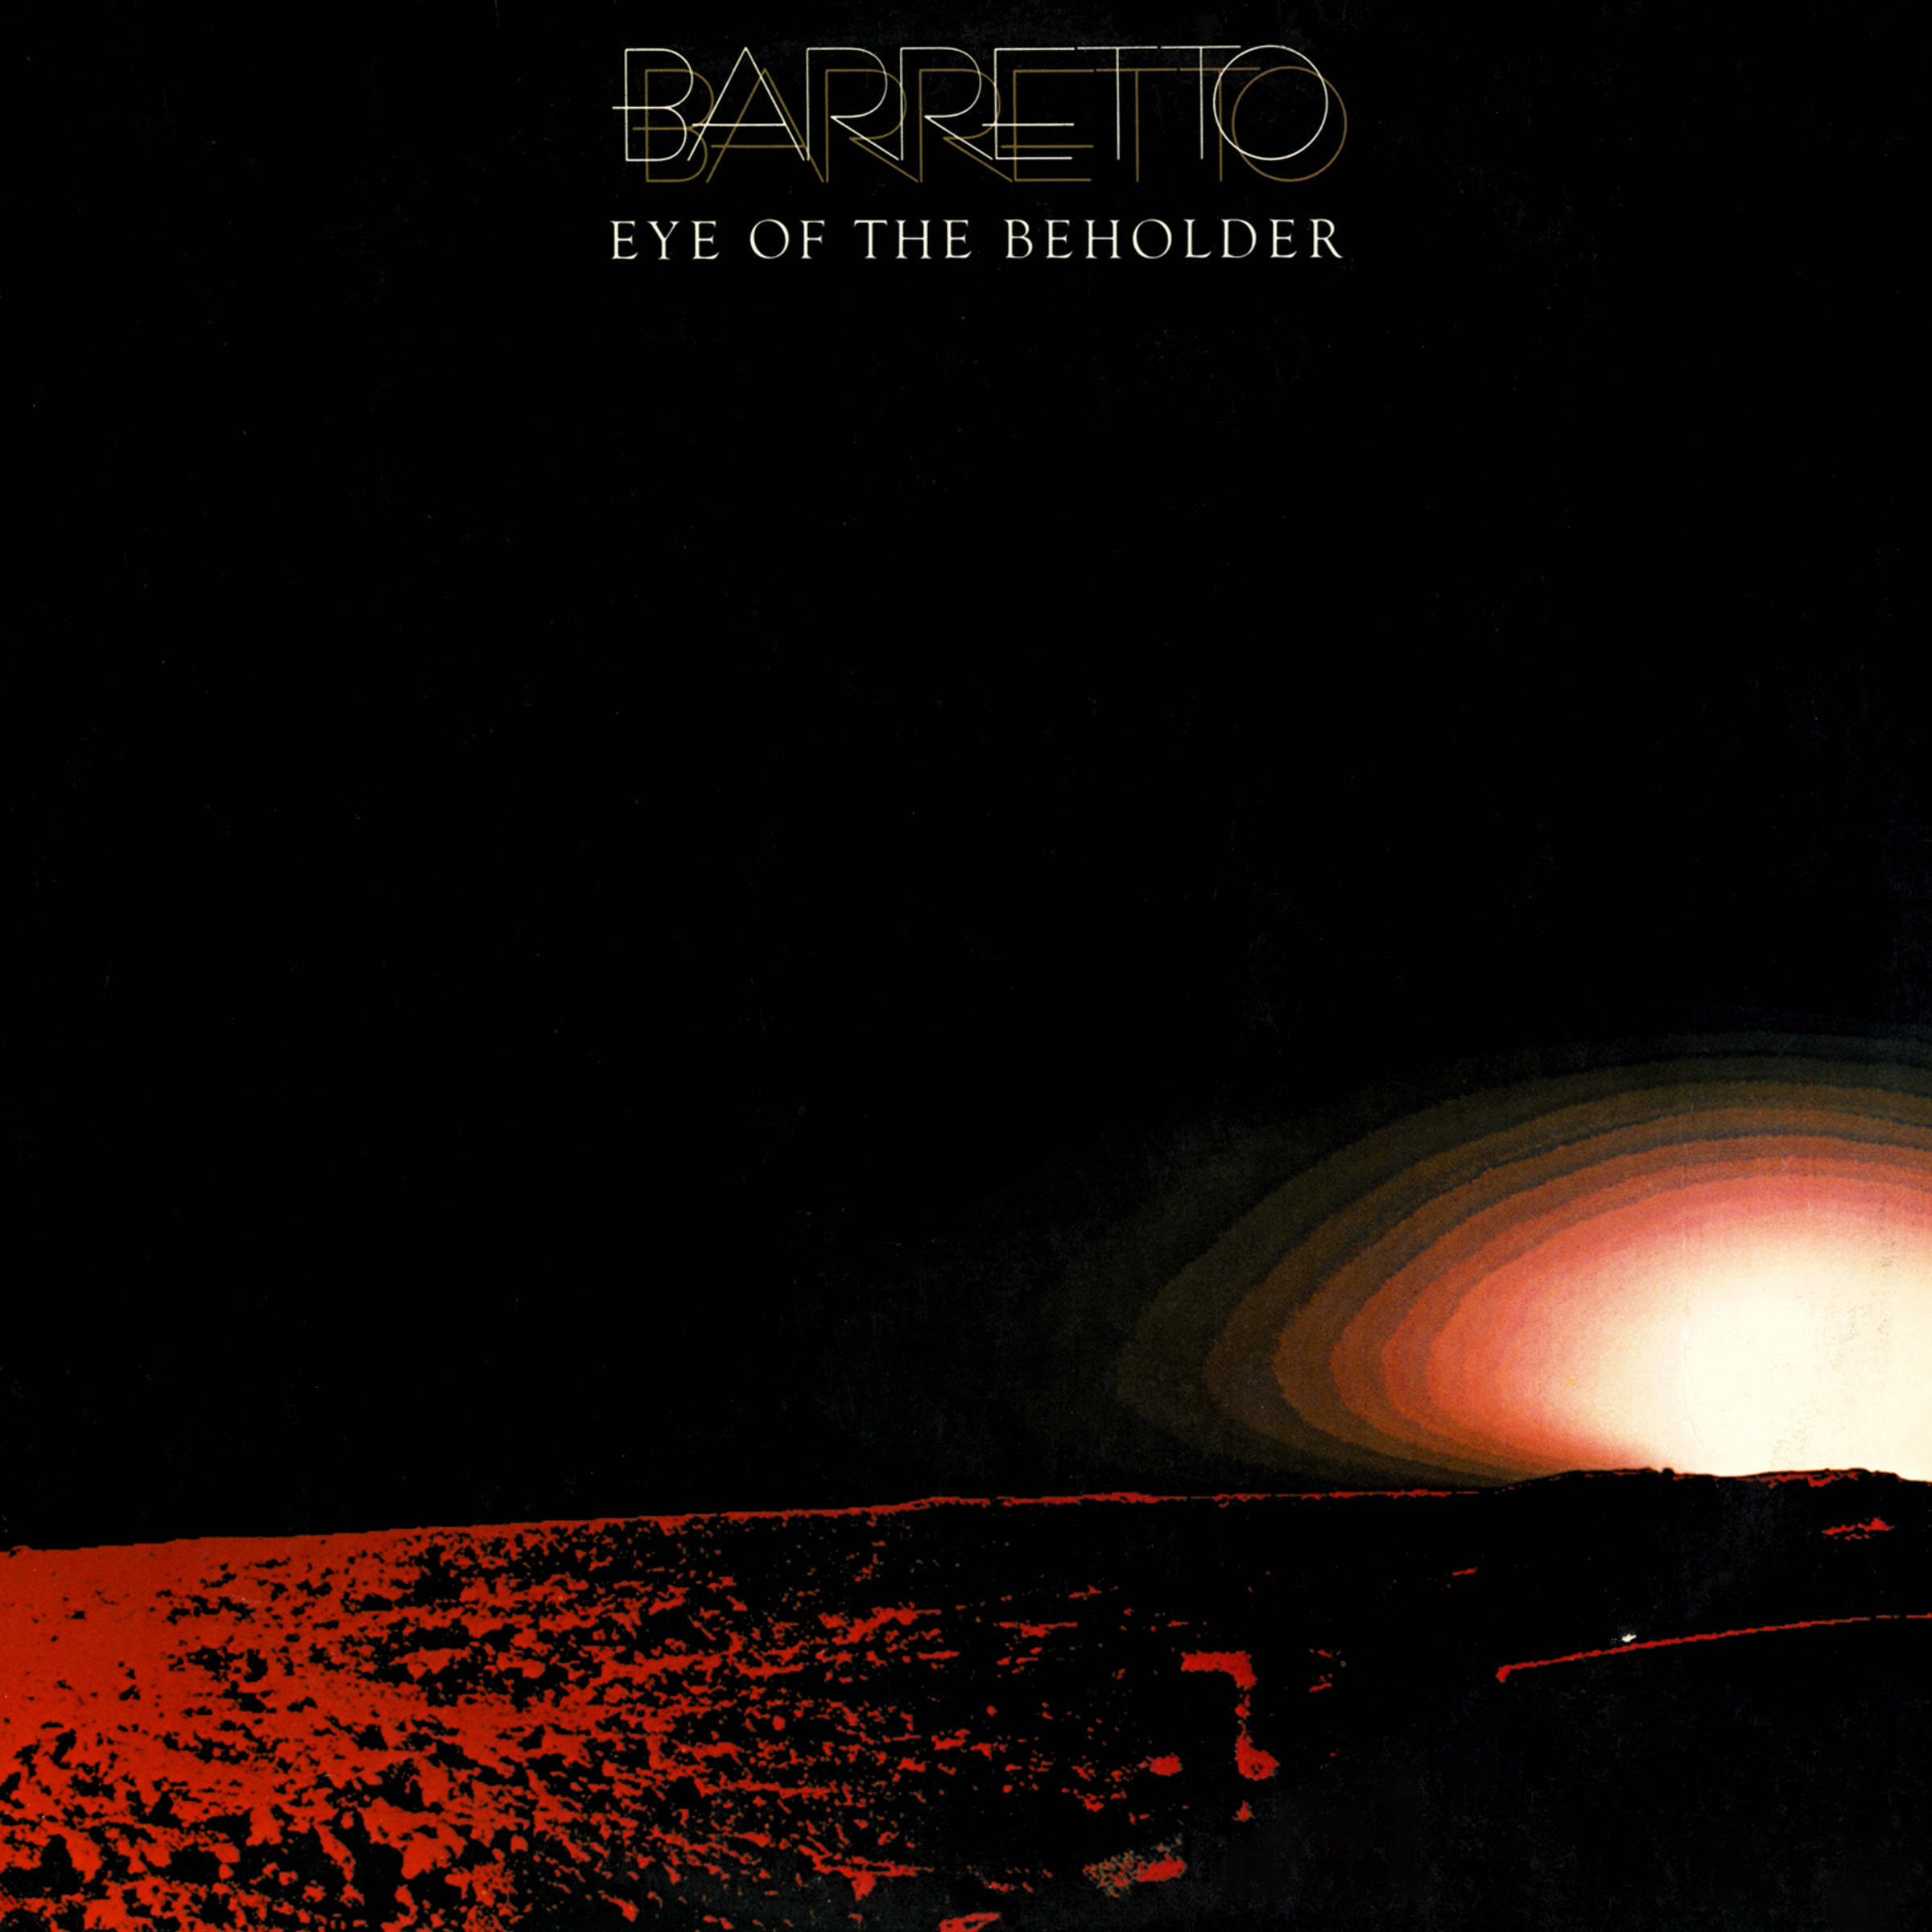 Ray Barretto - Eye Of The Beholder (1977/2012) [AcousticSounds FLAC 24bit/192kHz]